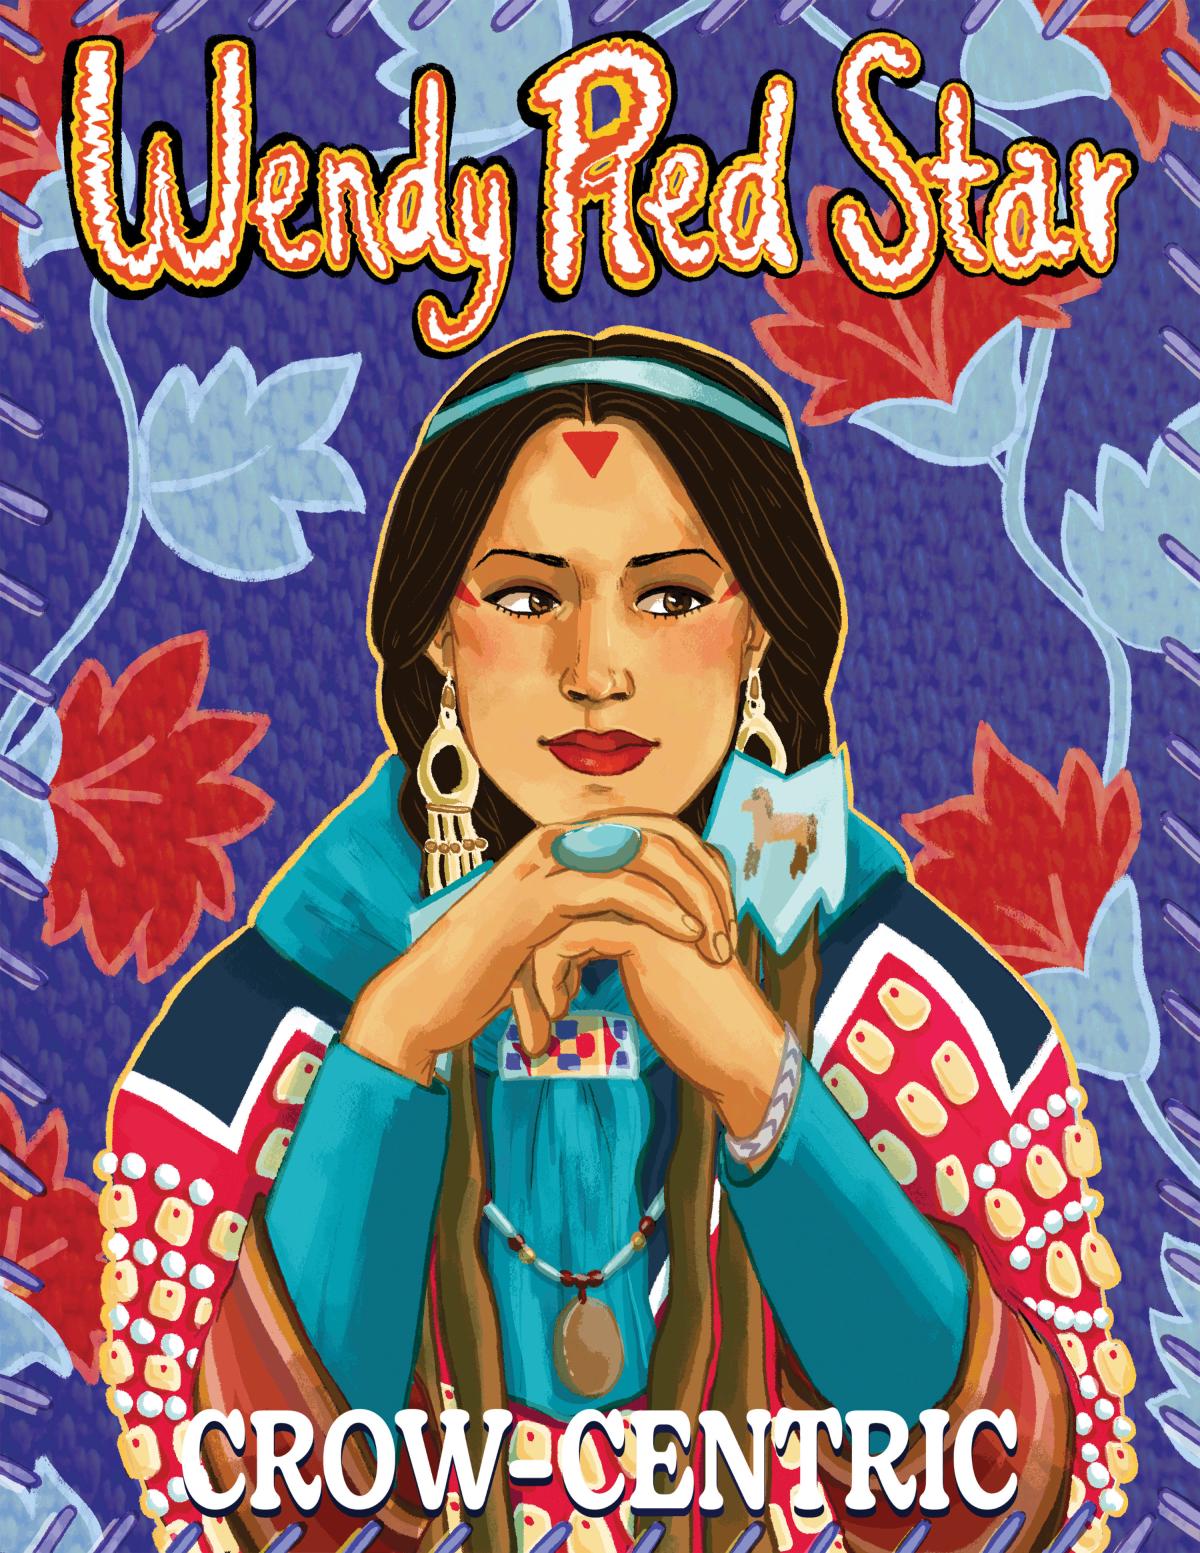 Wendy Red Star sits against a patterned blue background wearing traditional Crow regalia, with text reading: "Wendy Red Star: Crow-Centric."